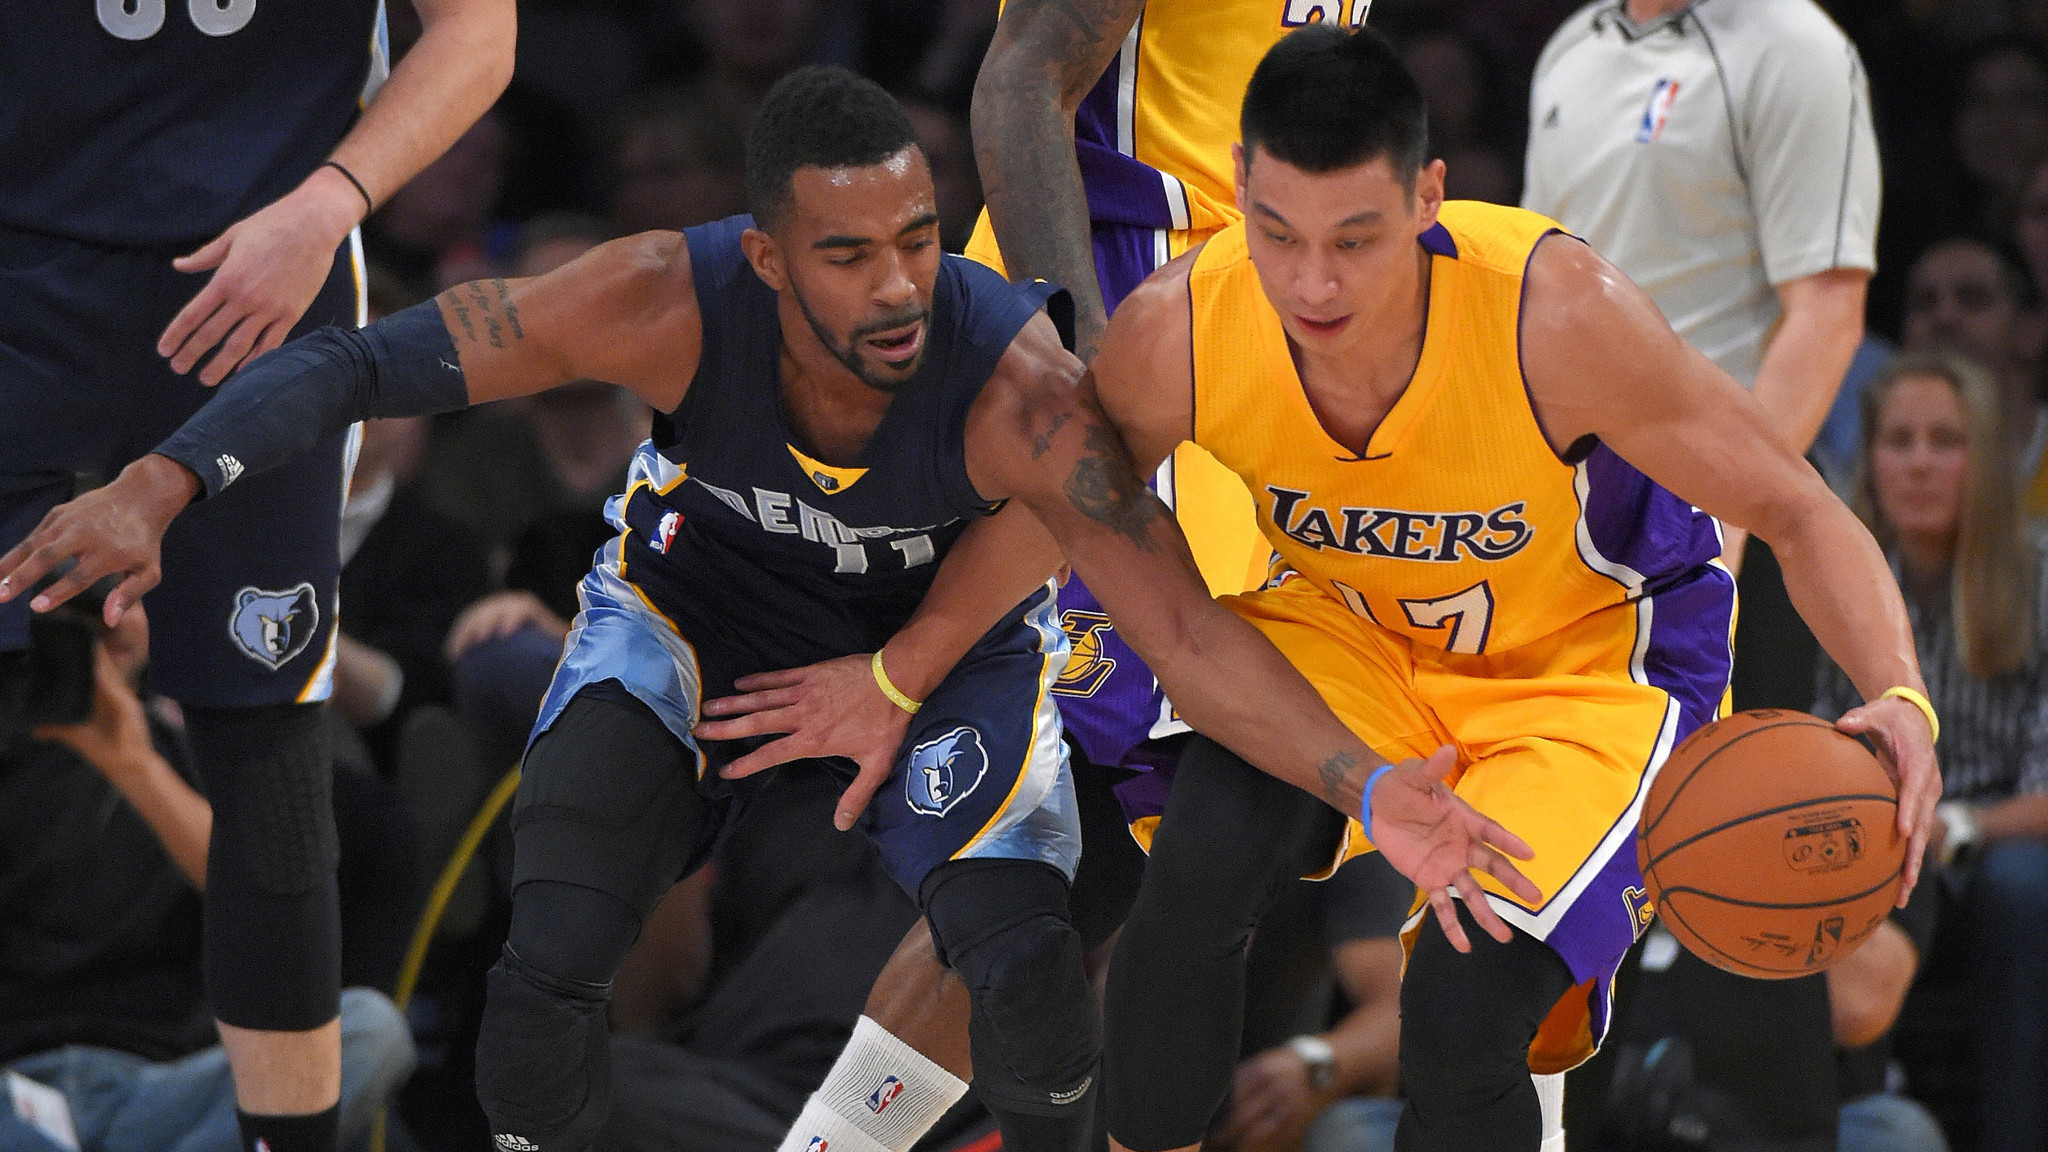 Jeremy Lin could return to Lakers' starting lineup, with asterisk - LA Times2048 x 1152